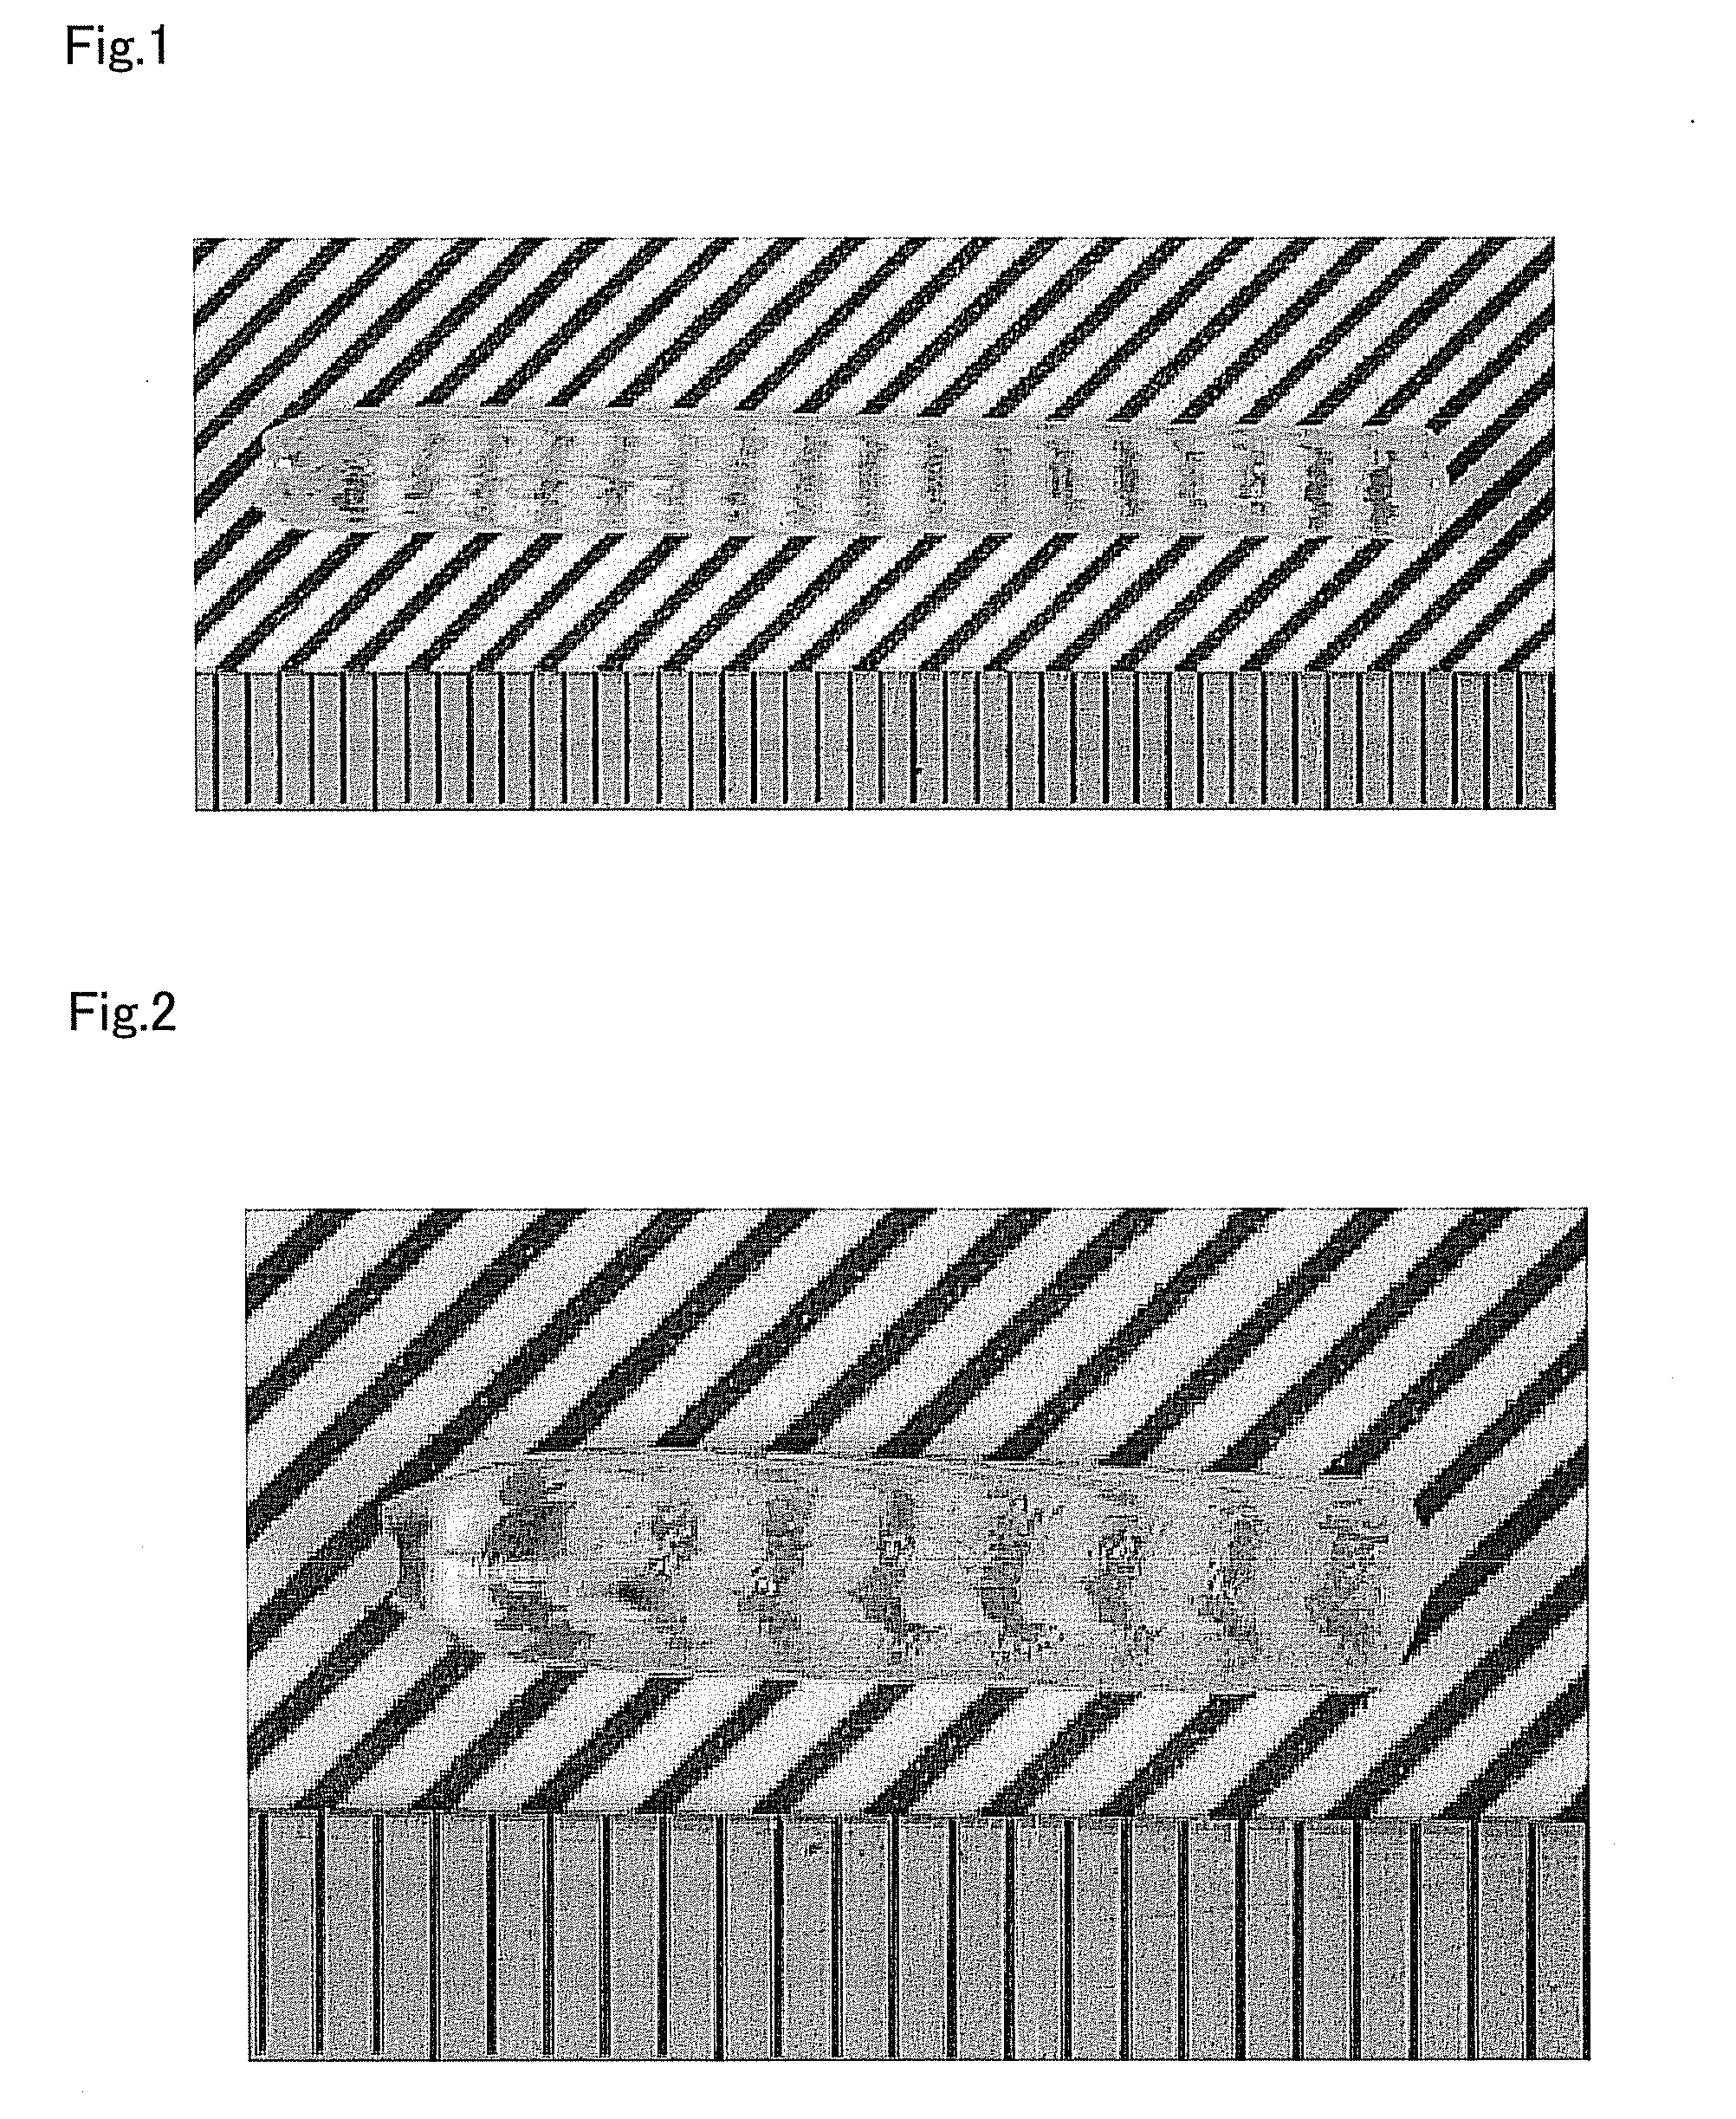 Pr-Containing Scintillator Single Crystal, Method of Manufacturing the Same, Radiation Detector, and Inspection Apparatus